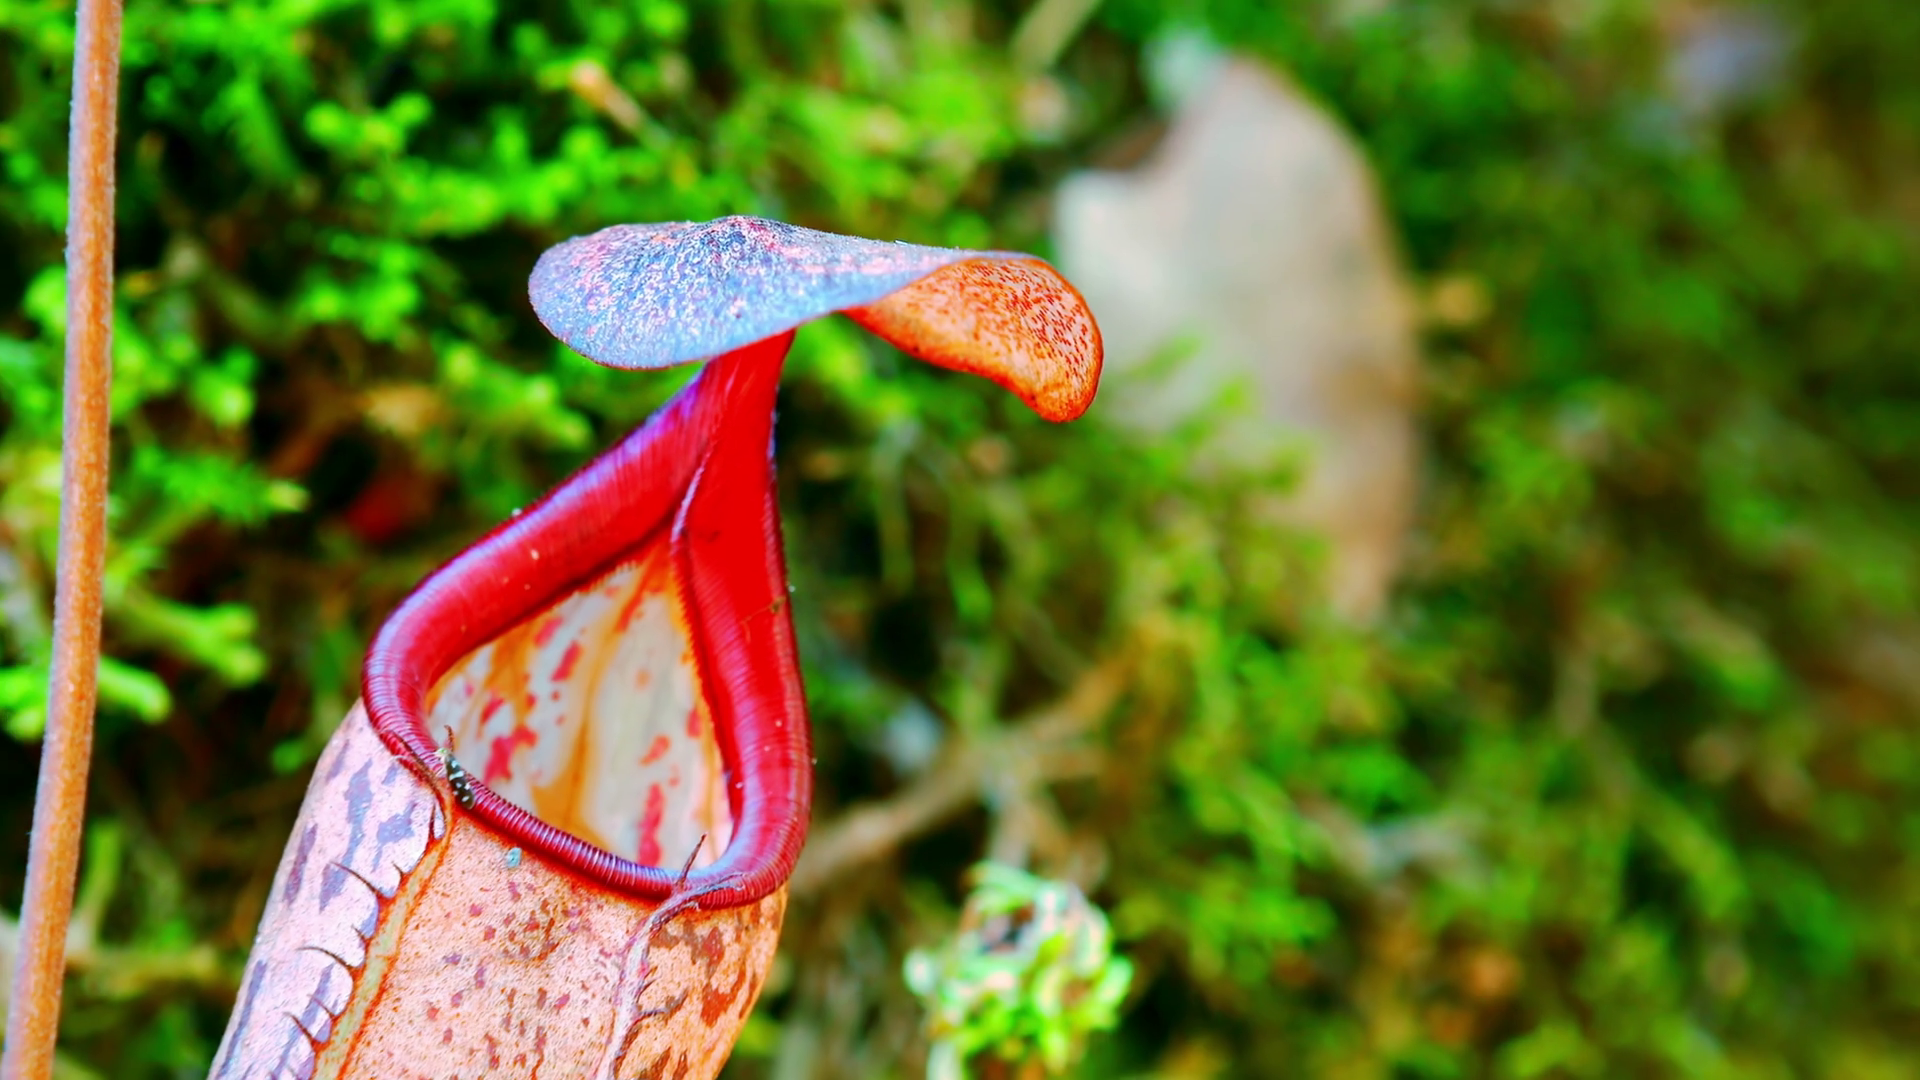 Nepenthes Pitcher Flower Exotic Carnivorous Plant Growing Among